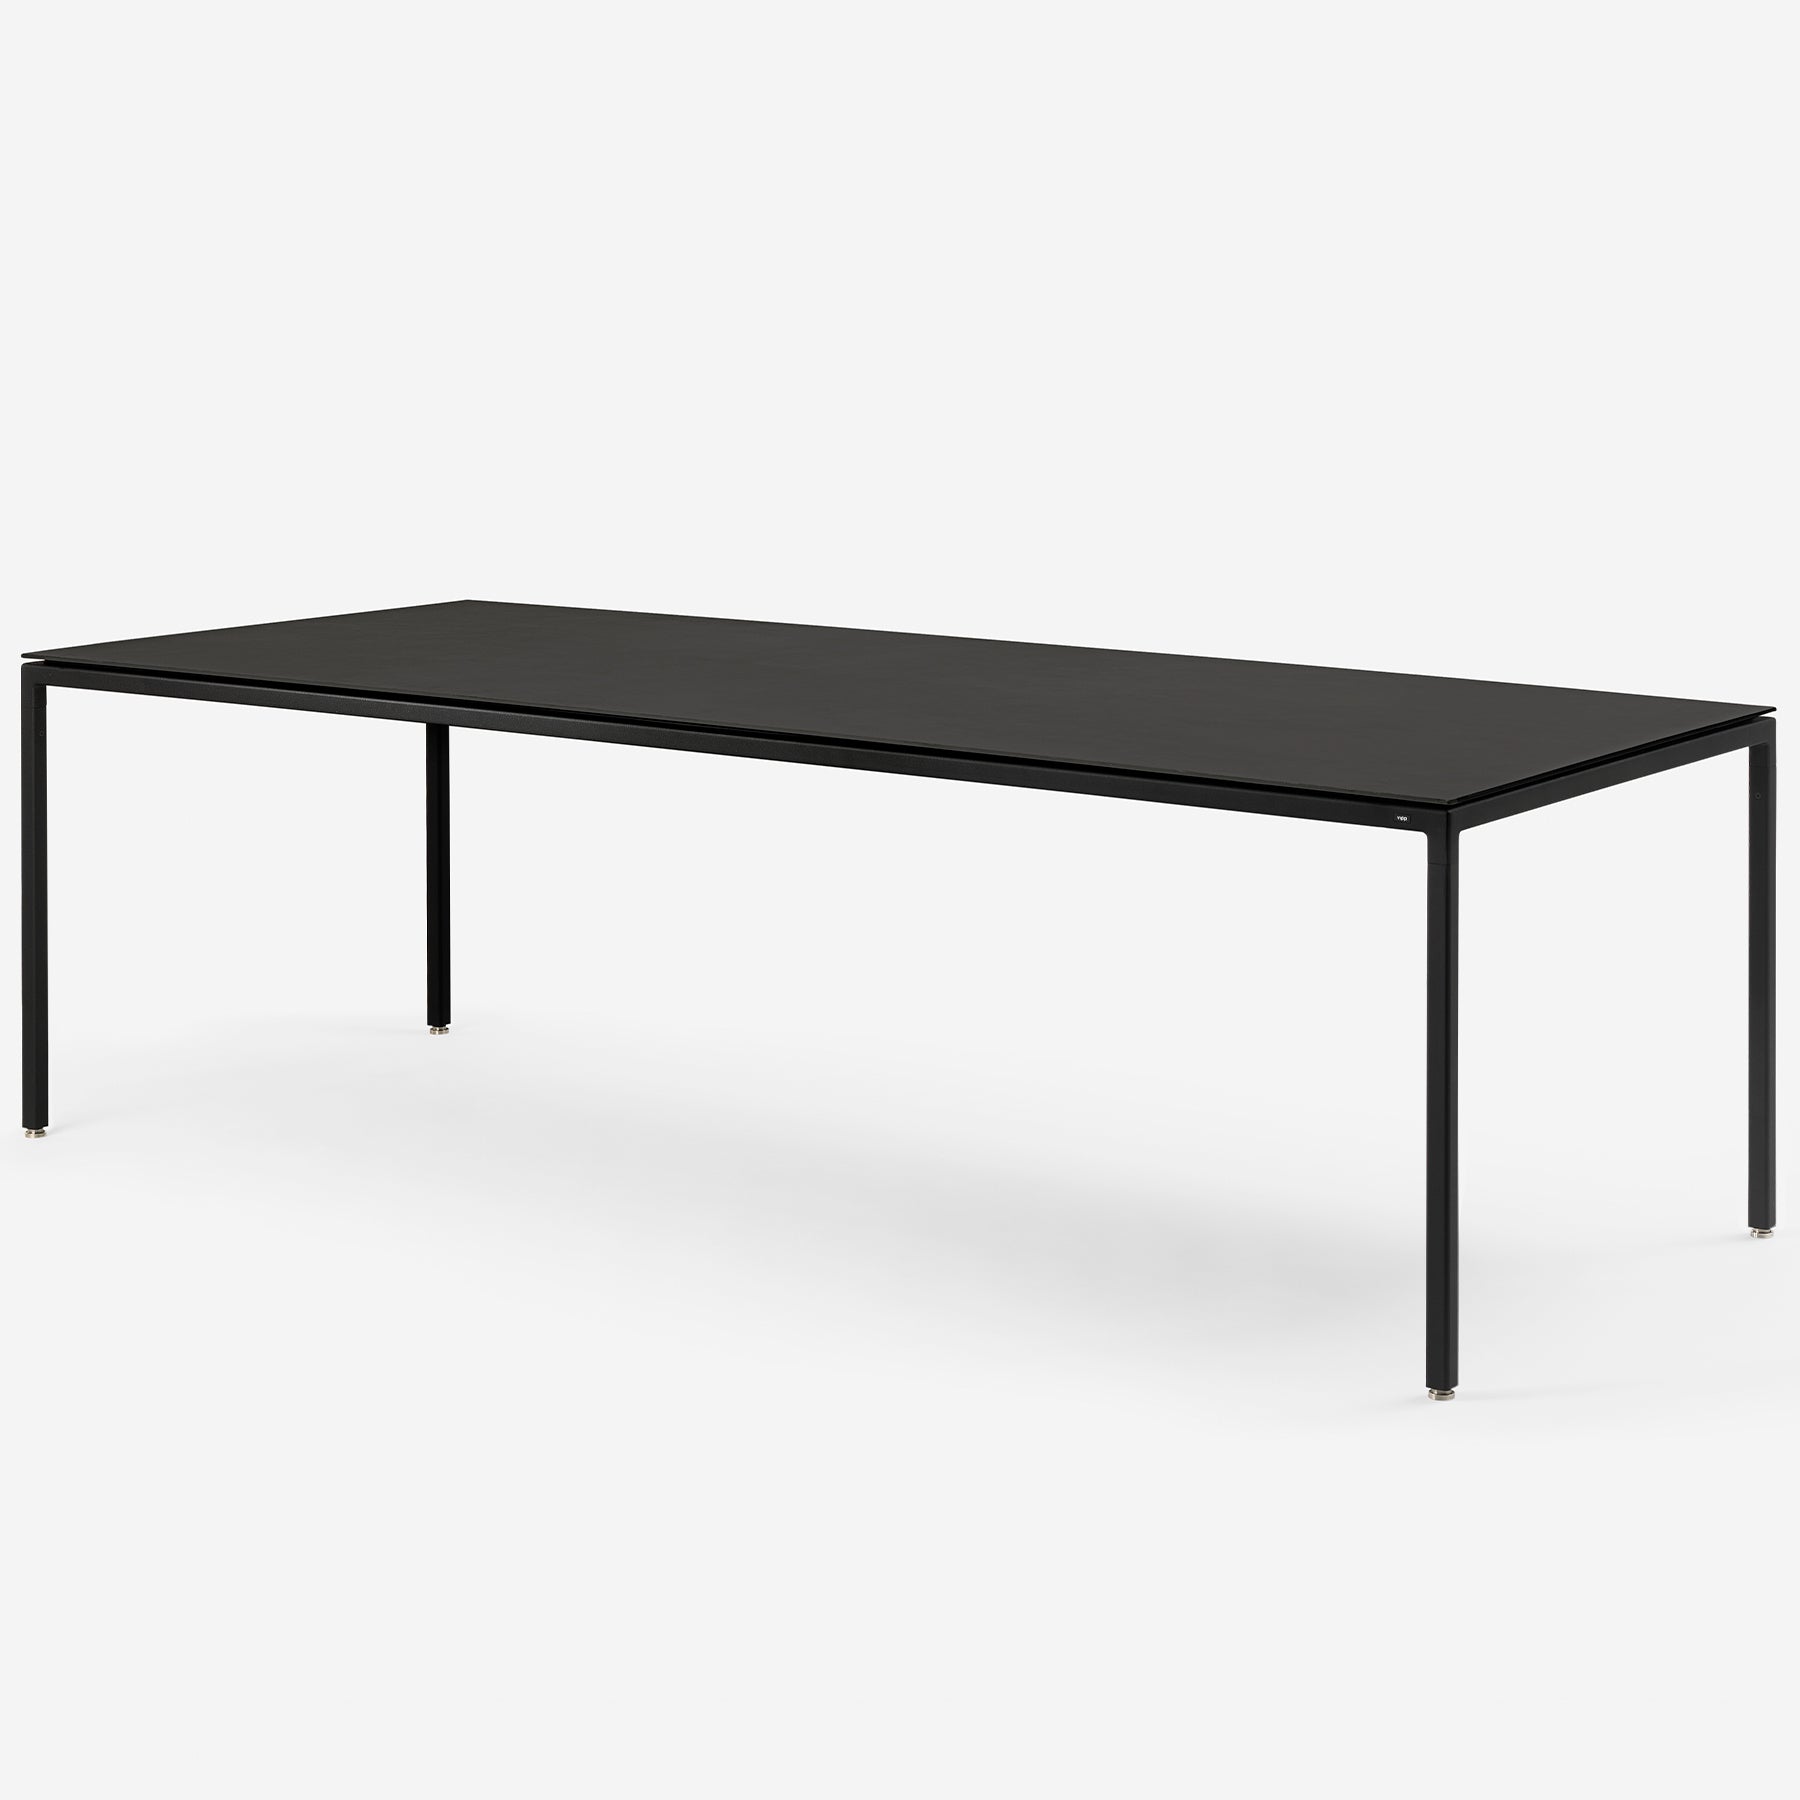 Vipp 972 Dining Table 240 cm